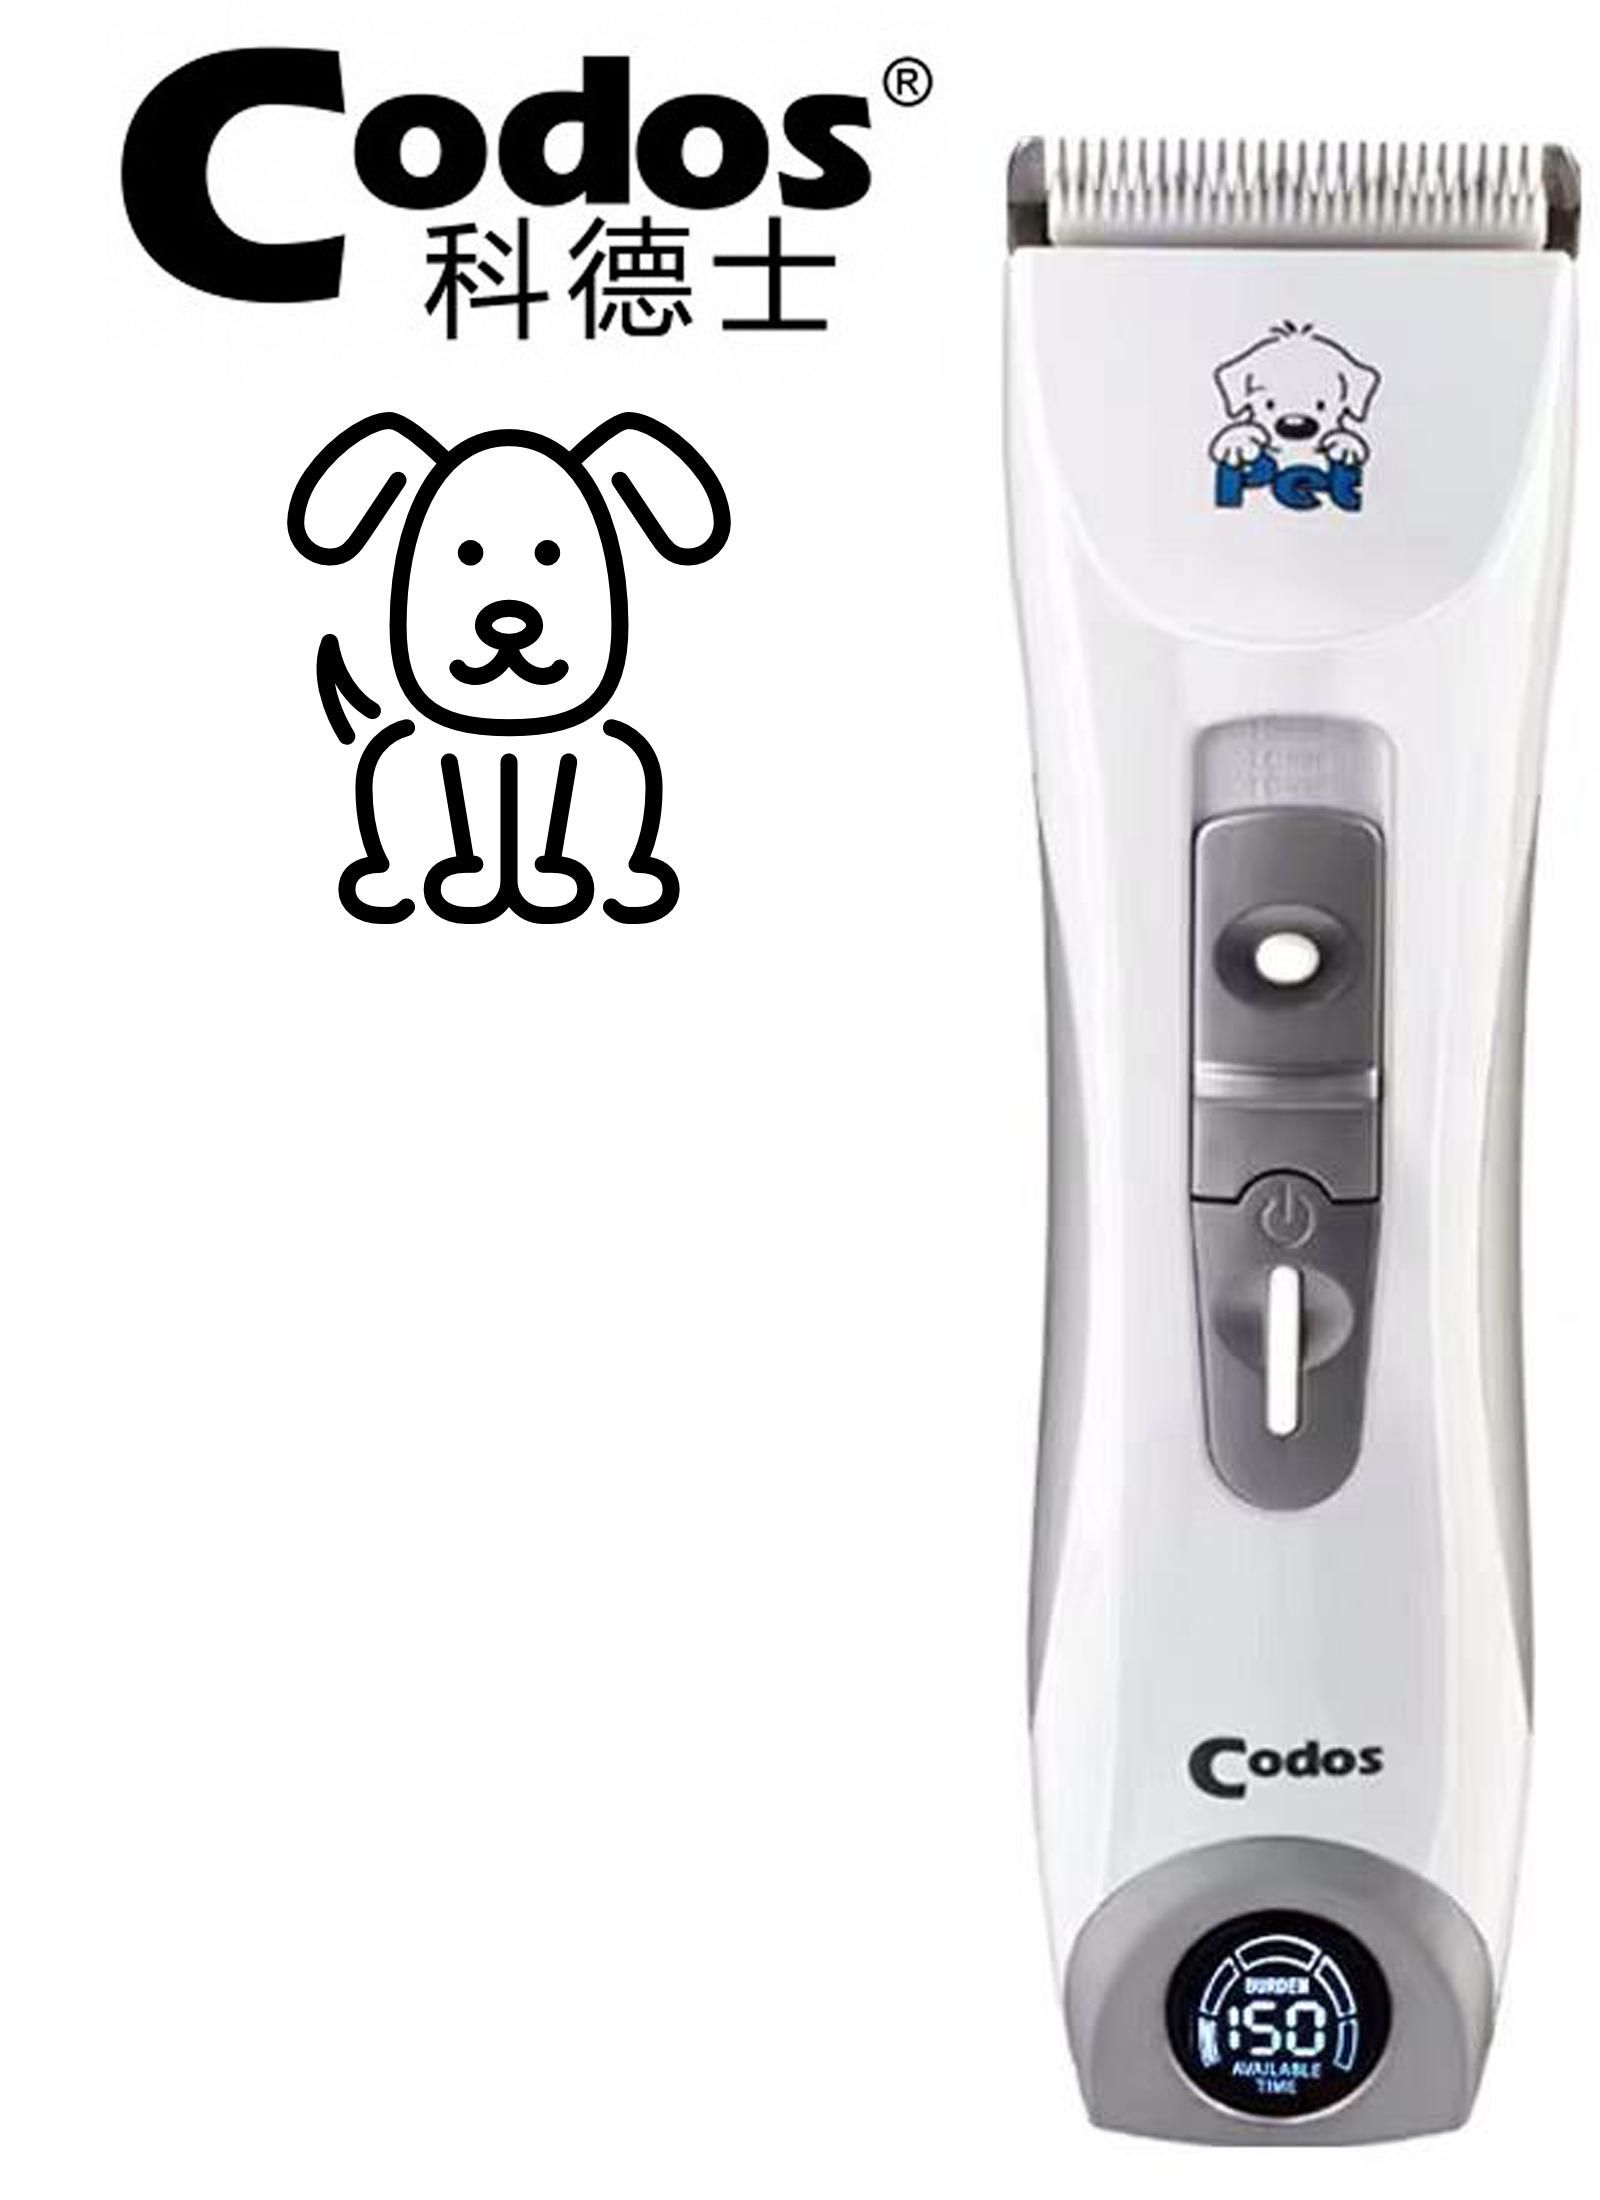 Codos Pet Electric Shaver Dog Hair Trimmer